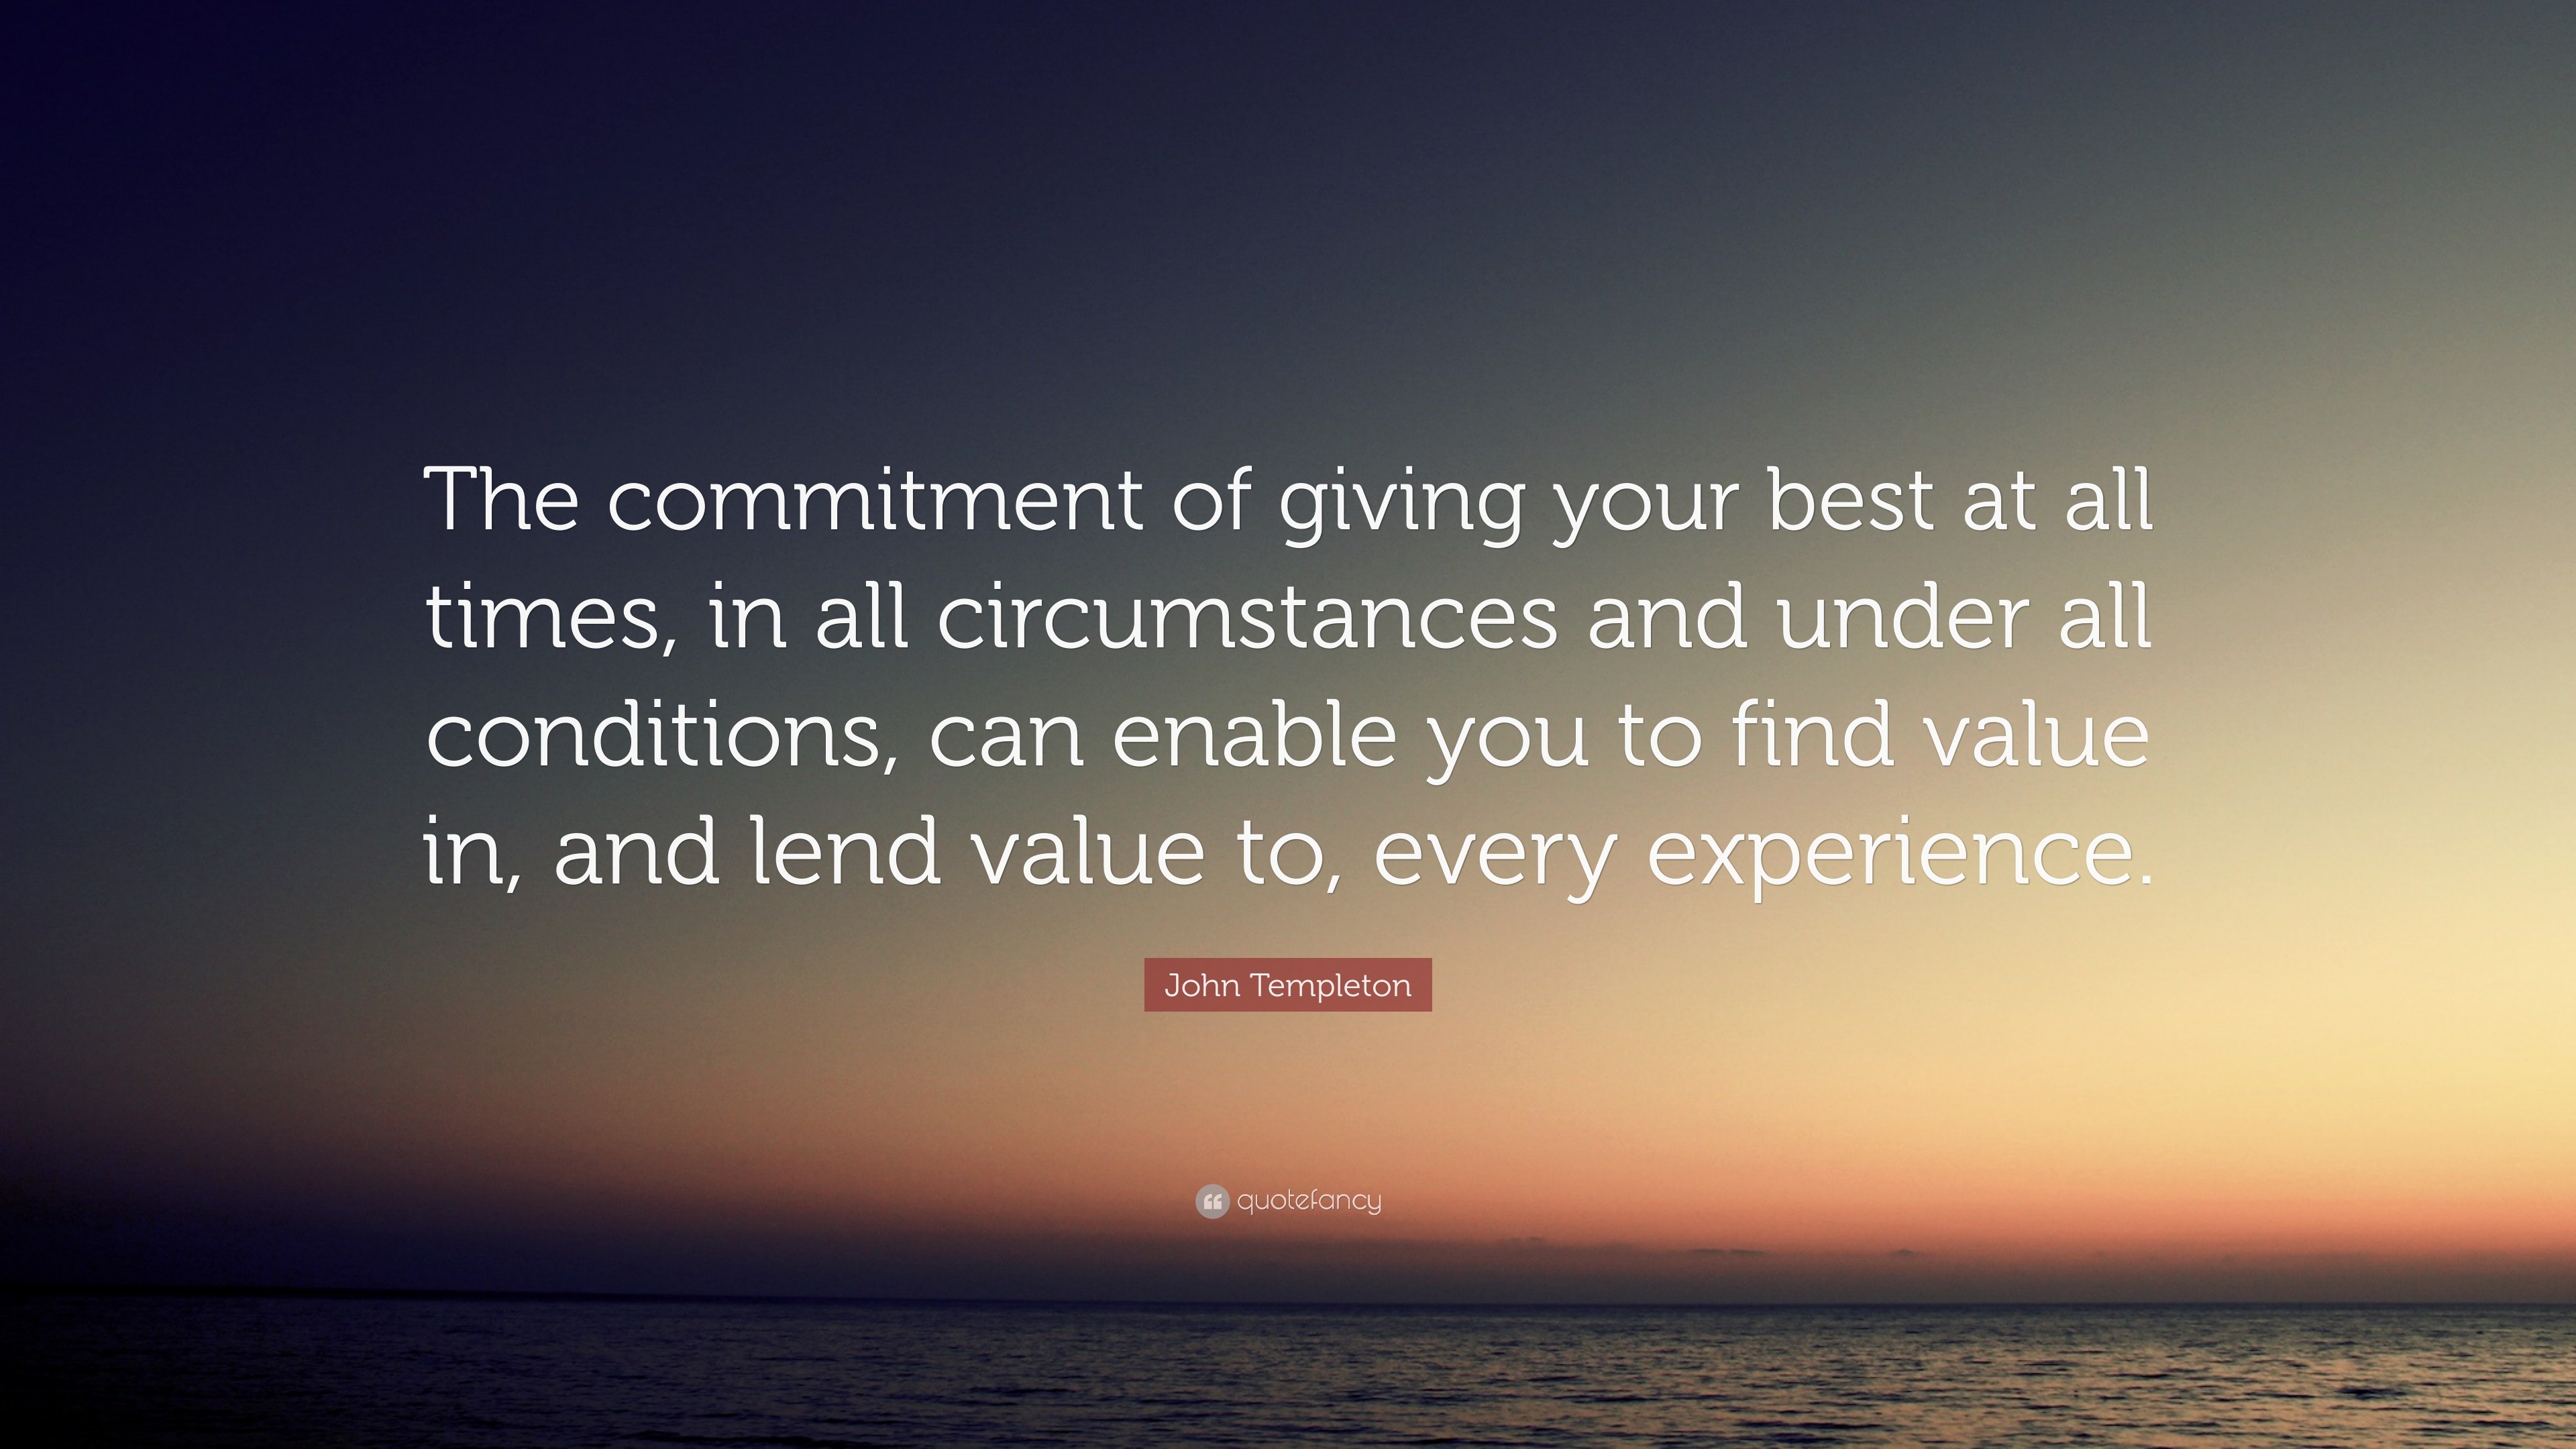 John Templeton Quote “The commitment of giving your best